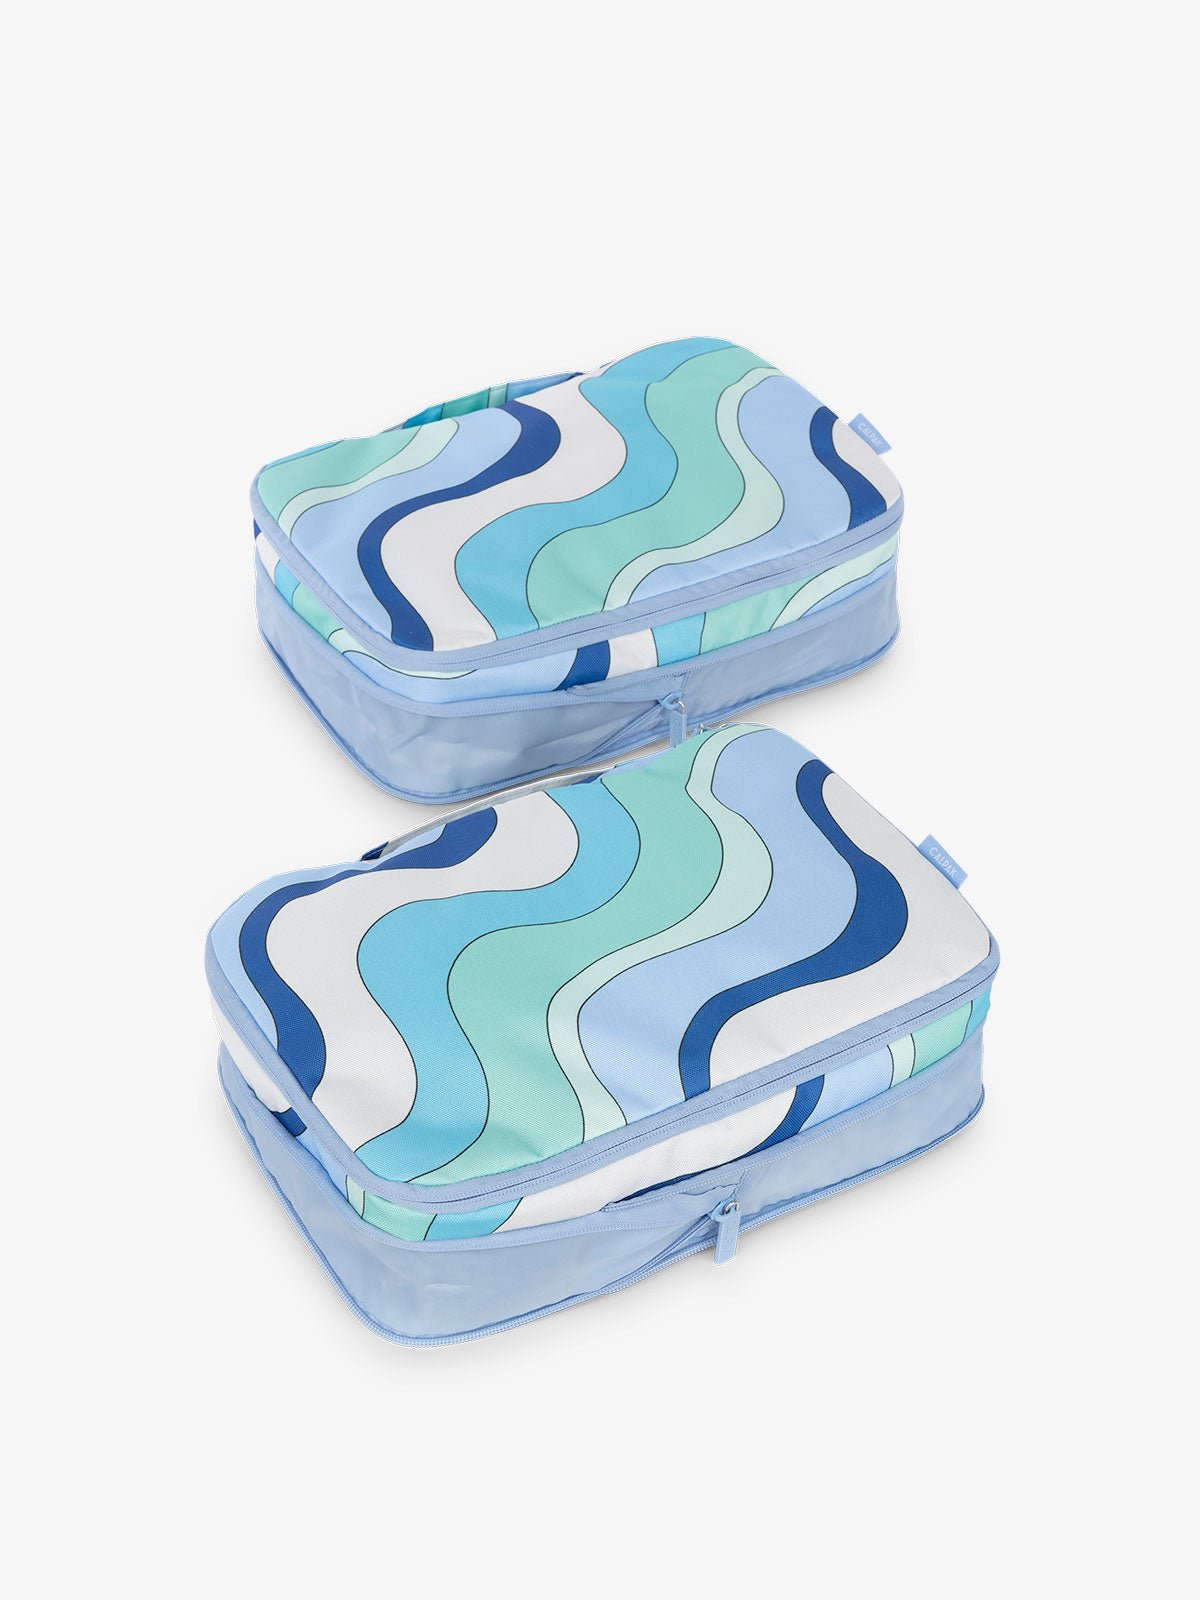 CALPAK compression packing cubes with handles in wavy blue print